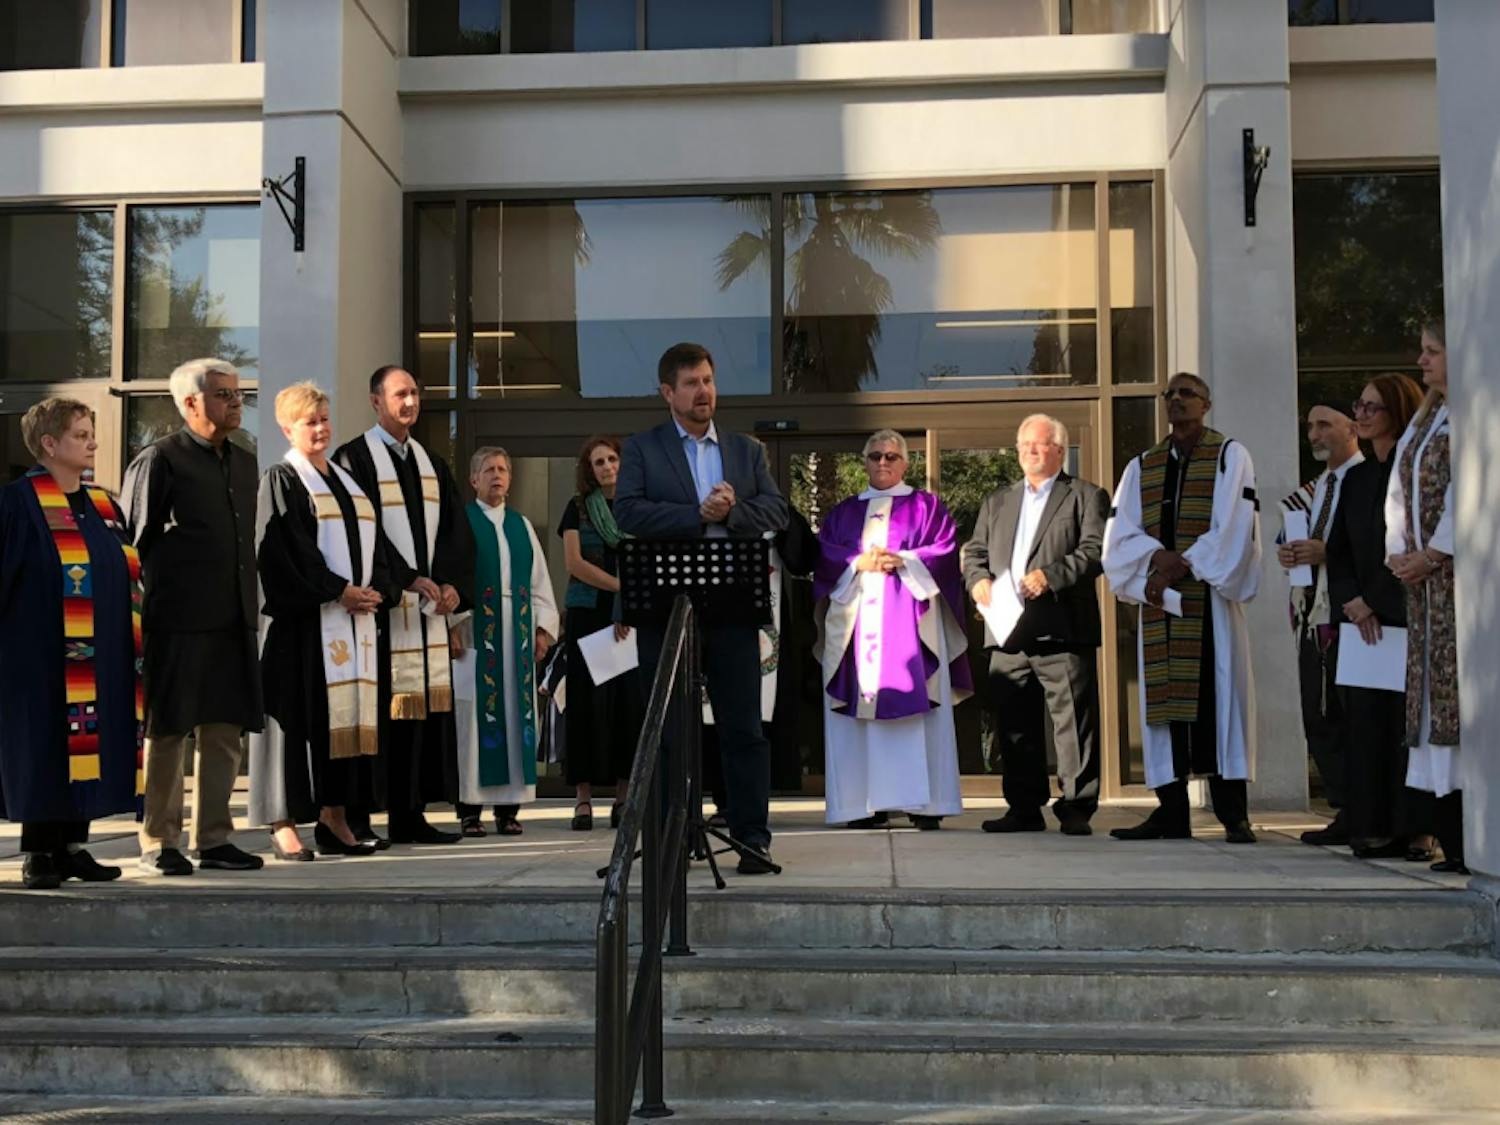 Mayor Lauren Poe calls on a crowd of 30 people to denounce hate speech and anti-semitism Tuesday afternoon outside of City Hall. When one person is harmed, it takes a toll on everyone, he said.
&nbsp;